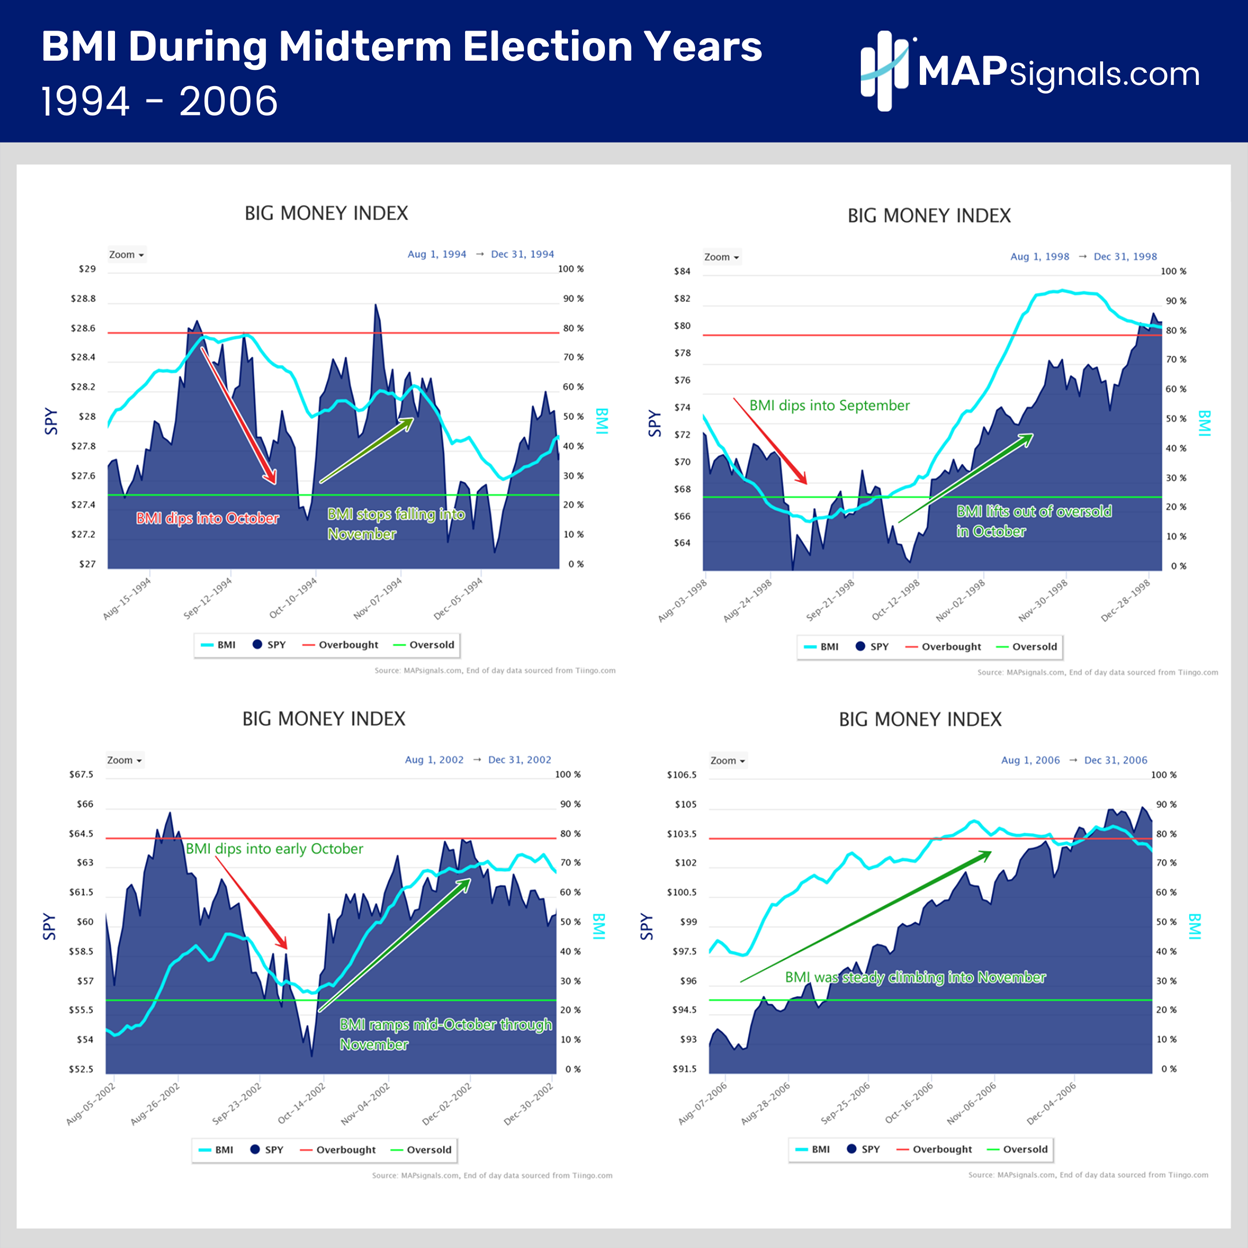 BMI During Midterm Election Years 1994 - 2006 | MAPsignals